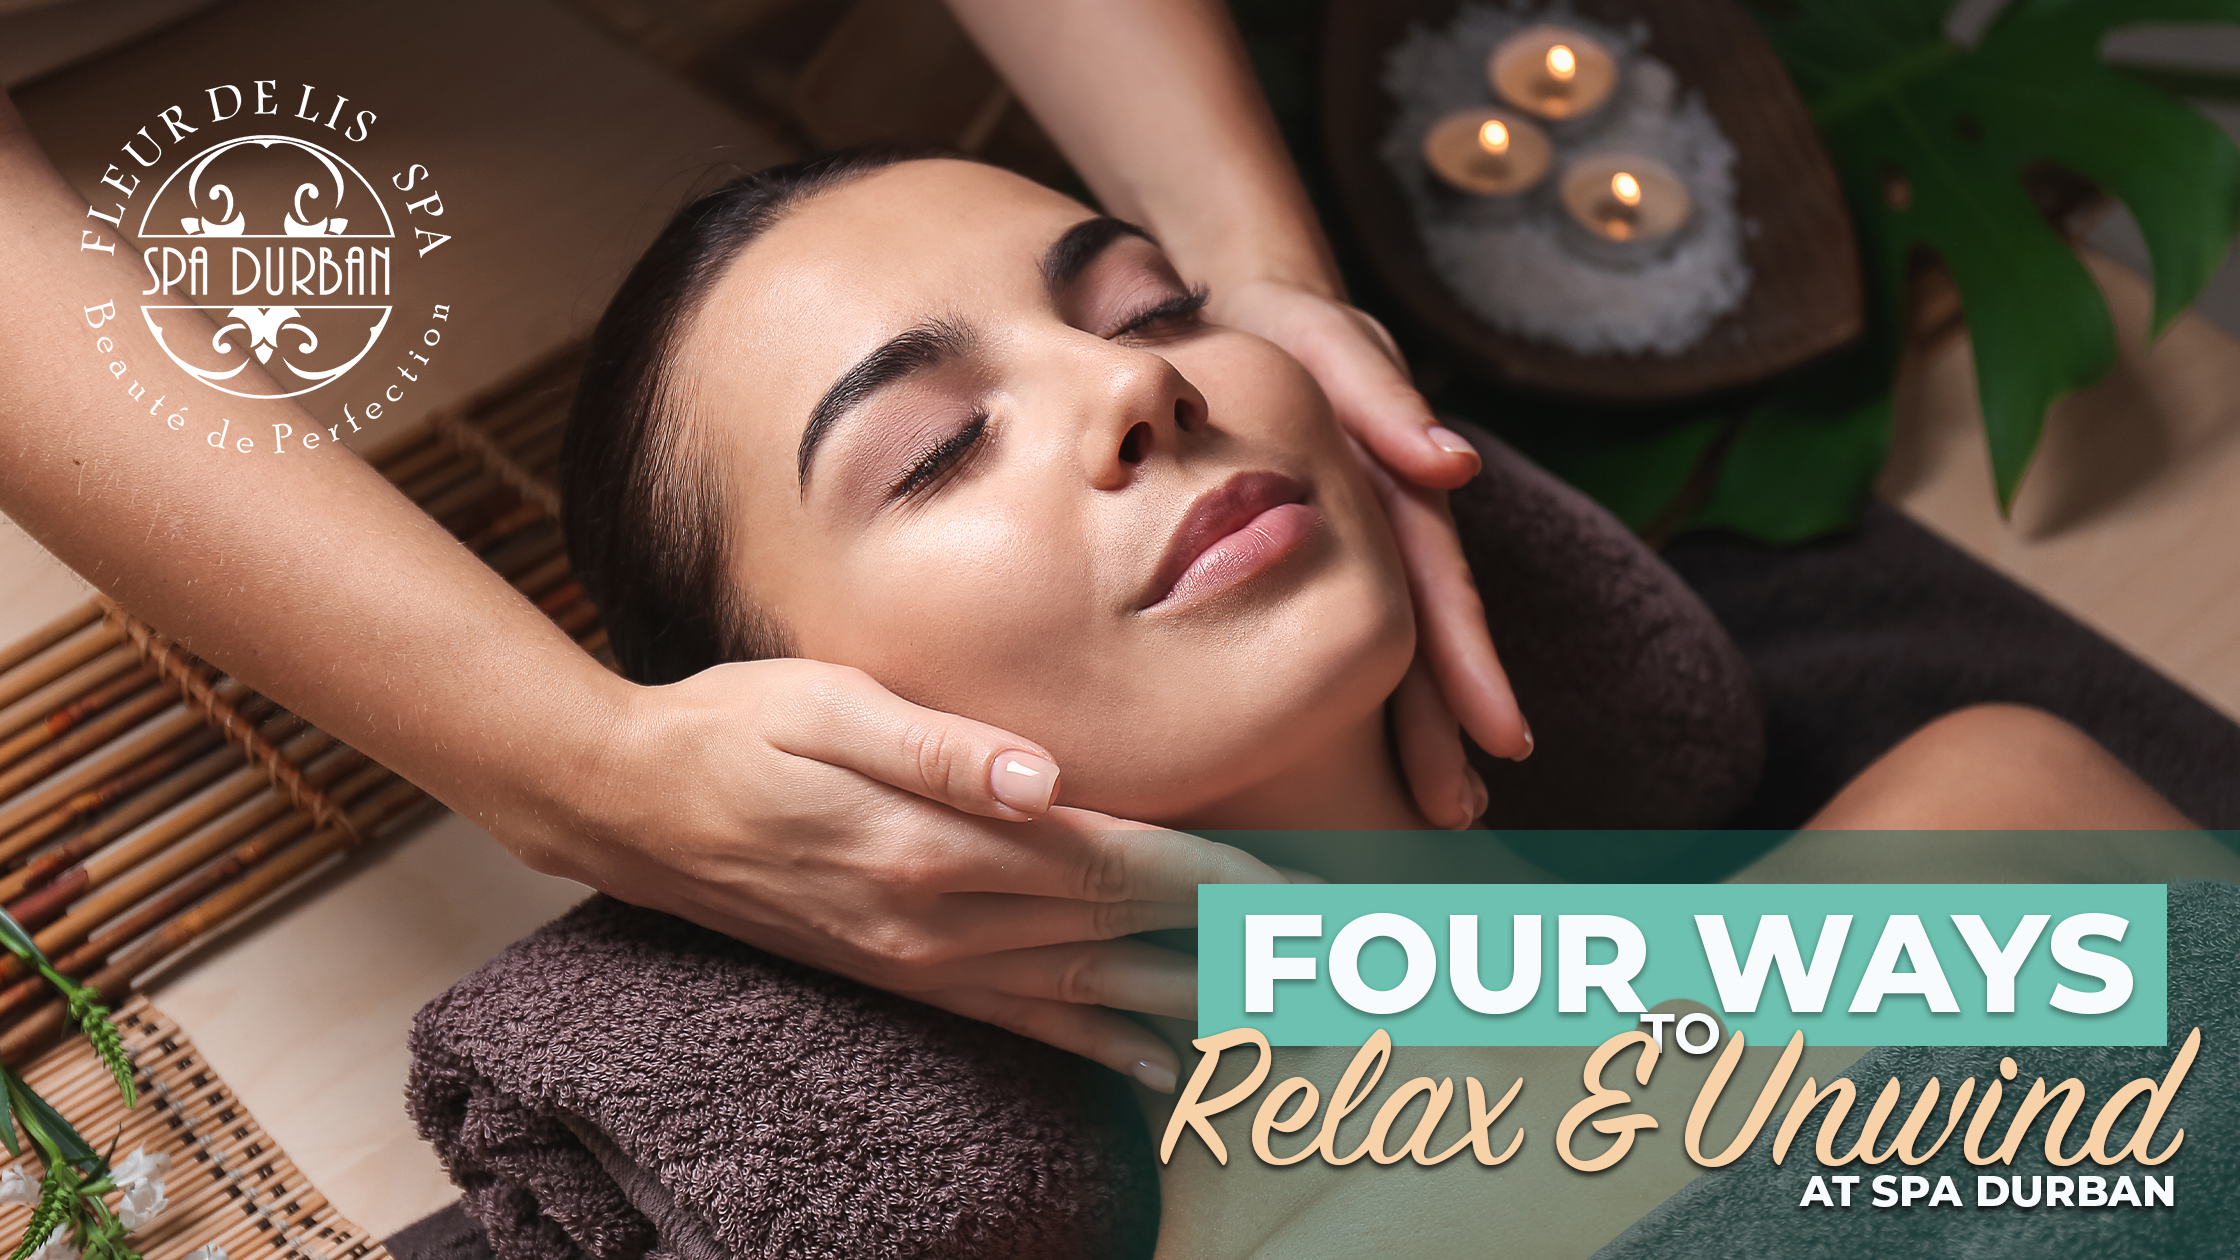 4 Ways to Relax and Unwind at Spa Durban